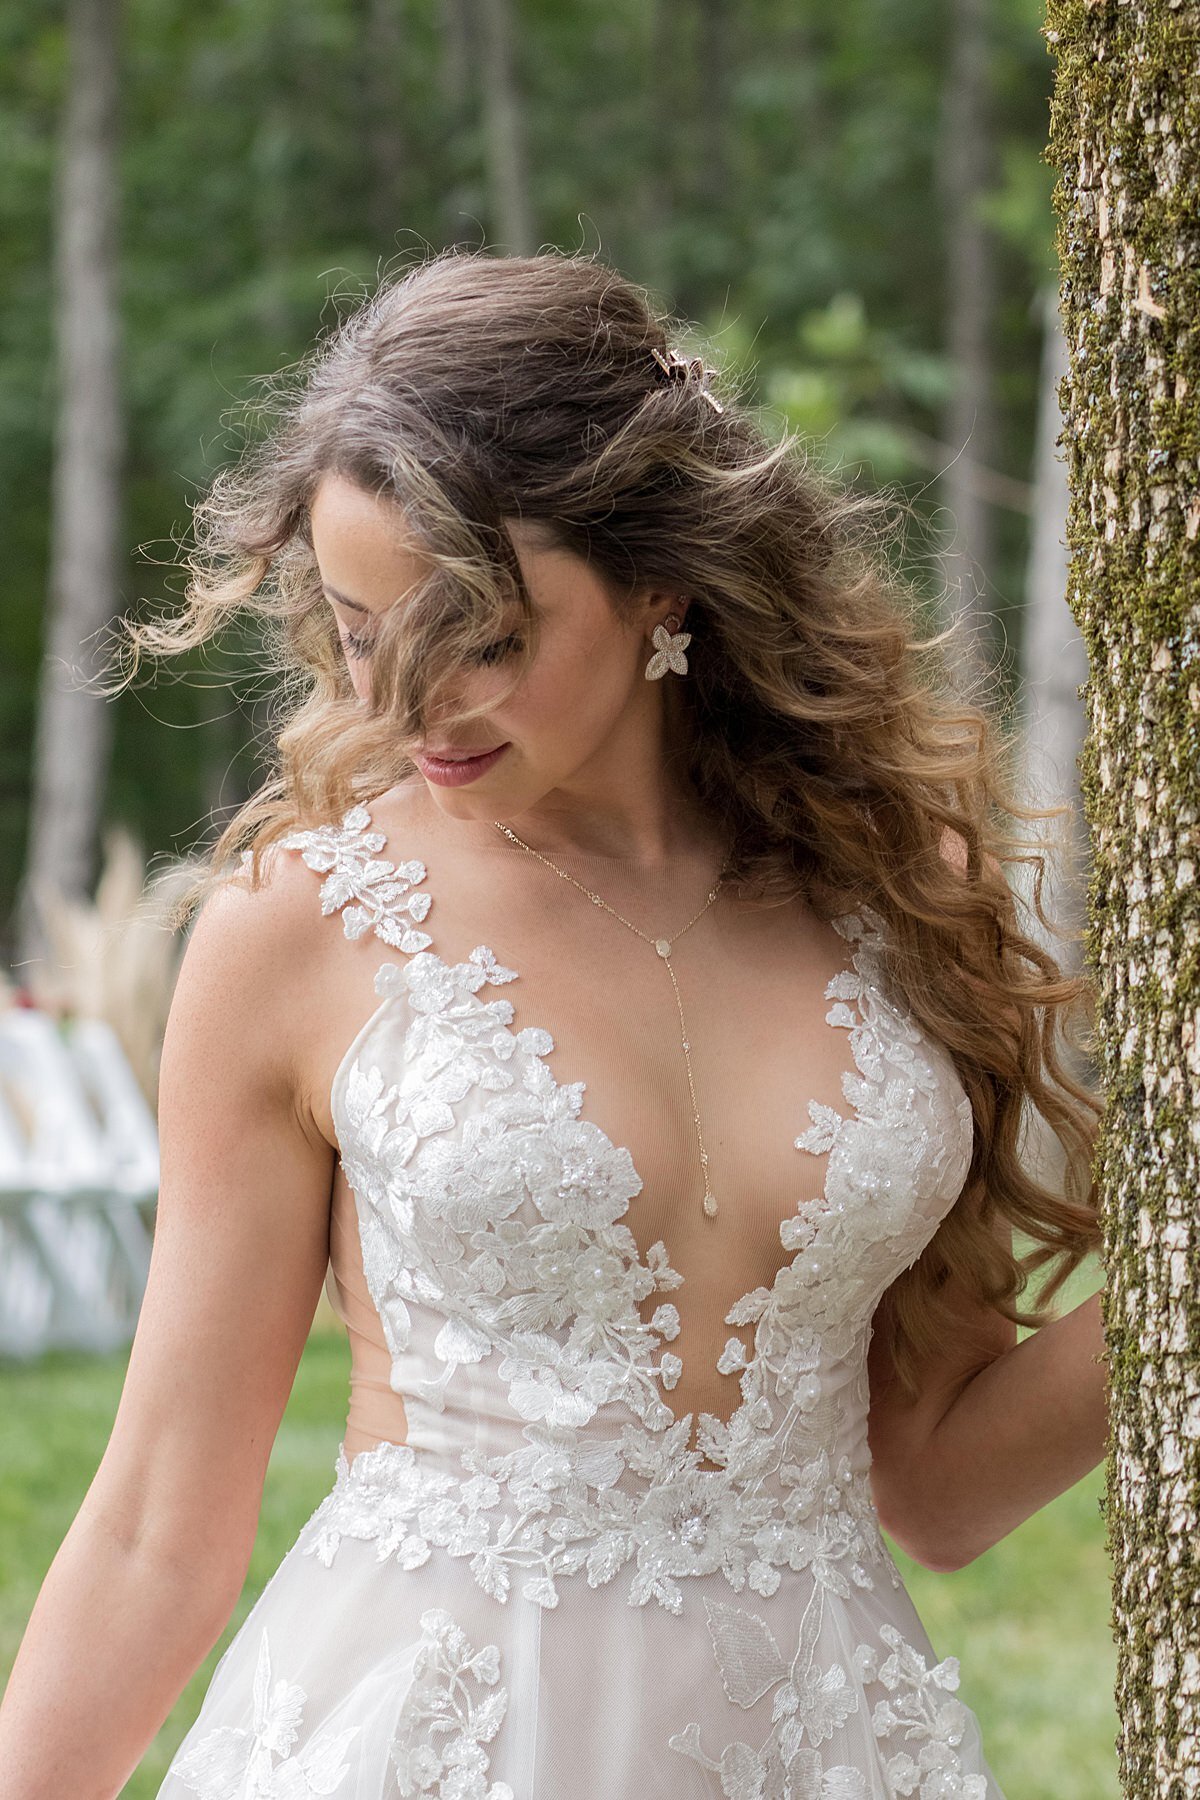 Bride wearing a delicate lace dress with a deep plunging neckline leaning up against a tree at her wedding ceremony at Saddle Woods Farm